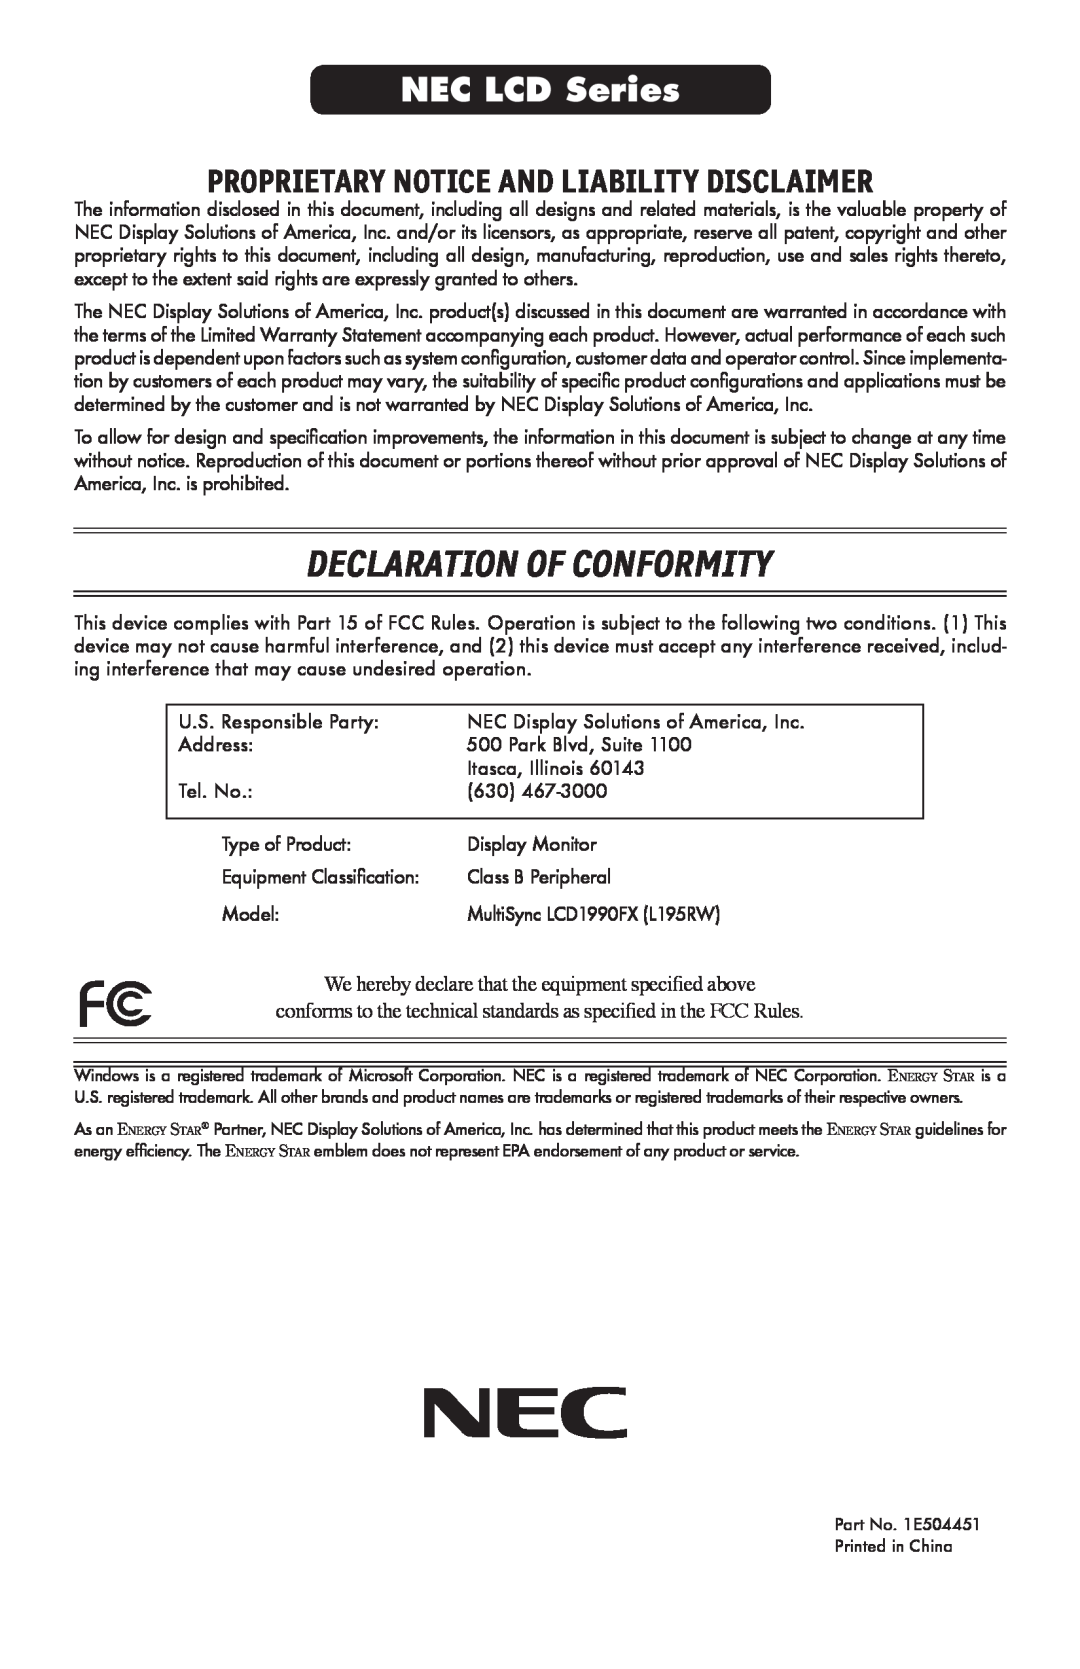 NEC LCD1990FXTM user manual Declaration Of Conformity, Proprietary Notice And Liability Disclaimer, NEC LCD Series 